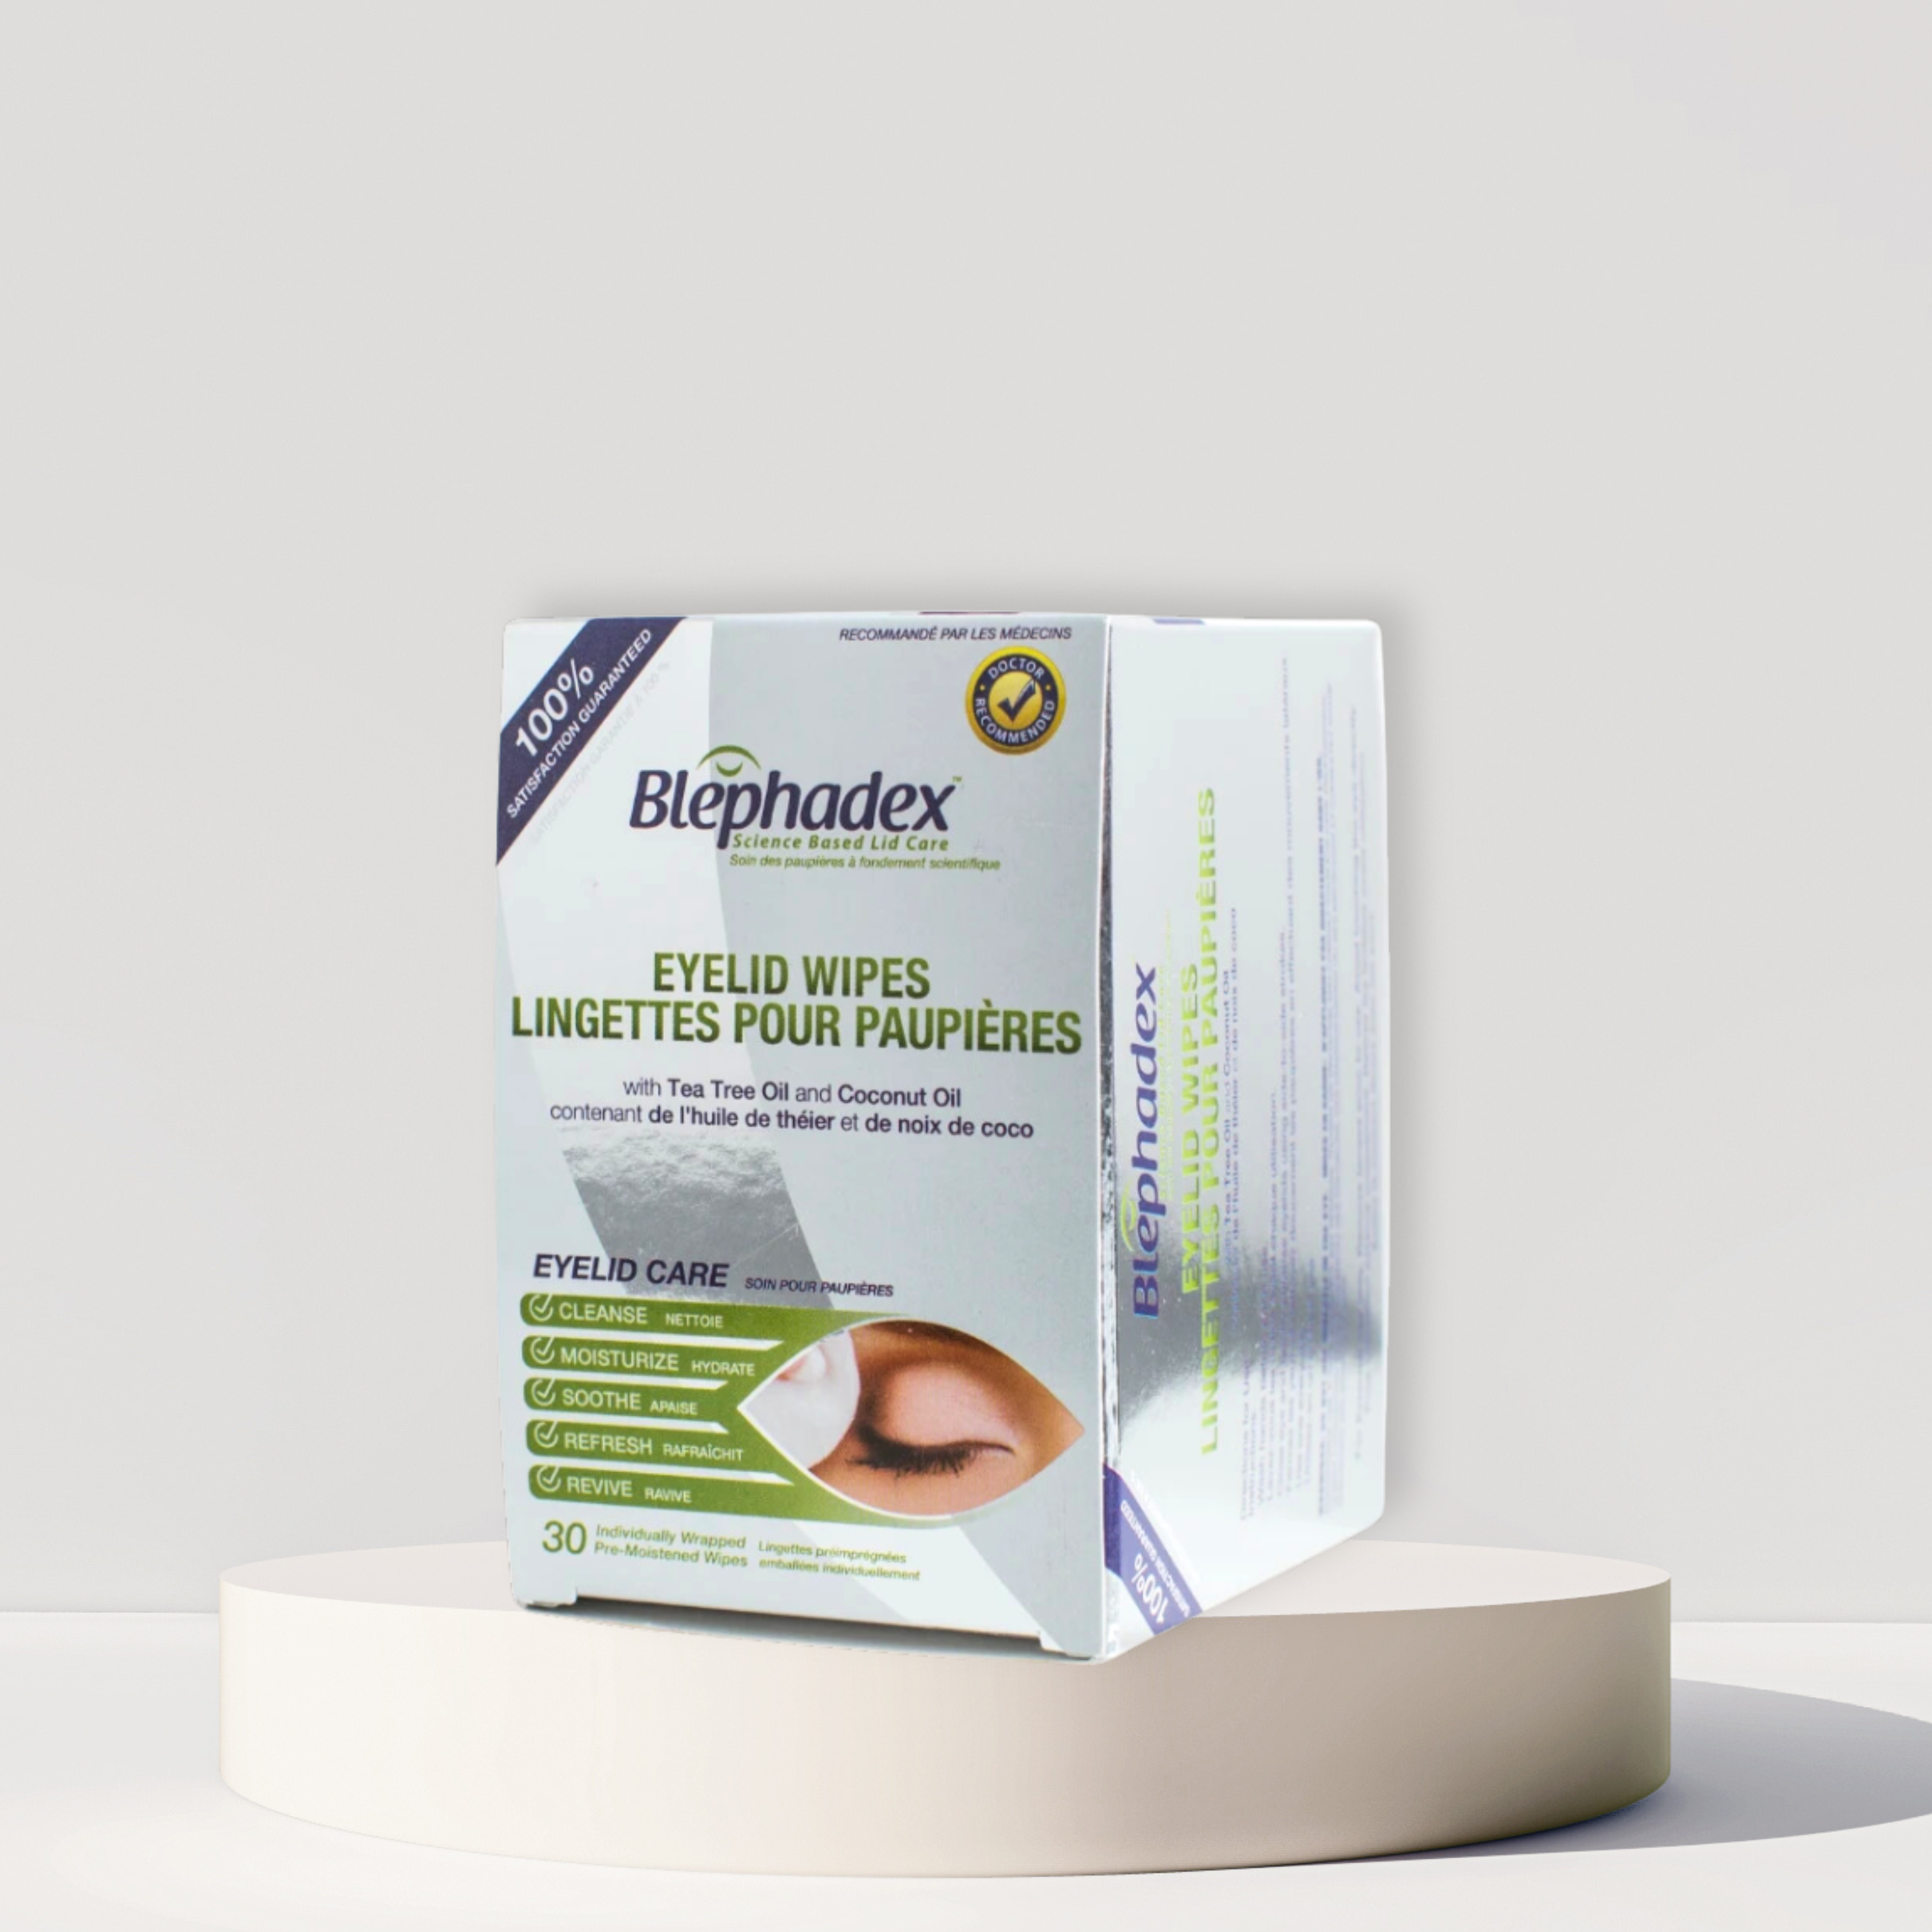 Blephadex Lid Cleansing Wipes (30ct)